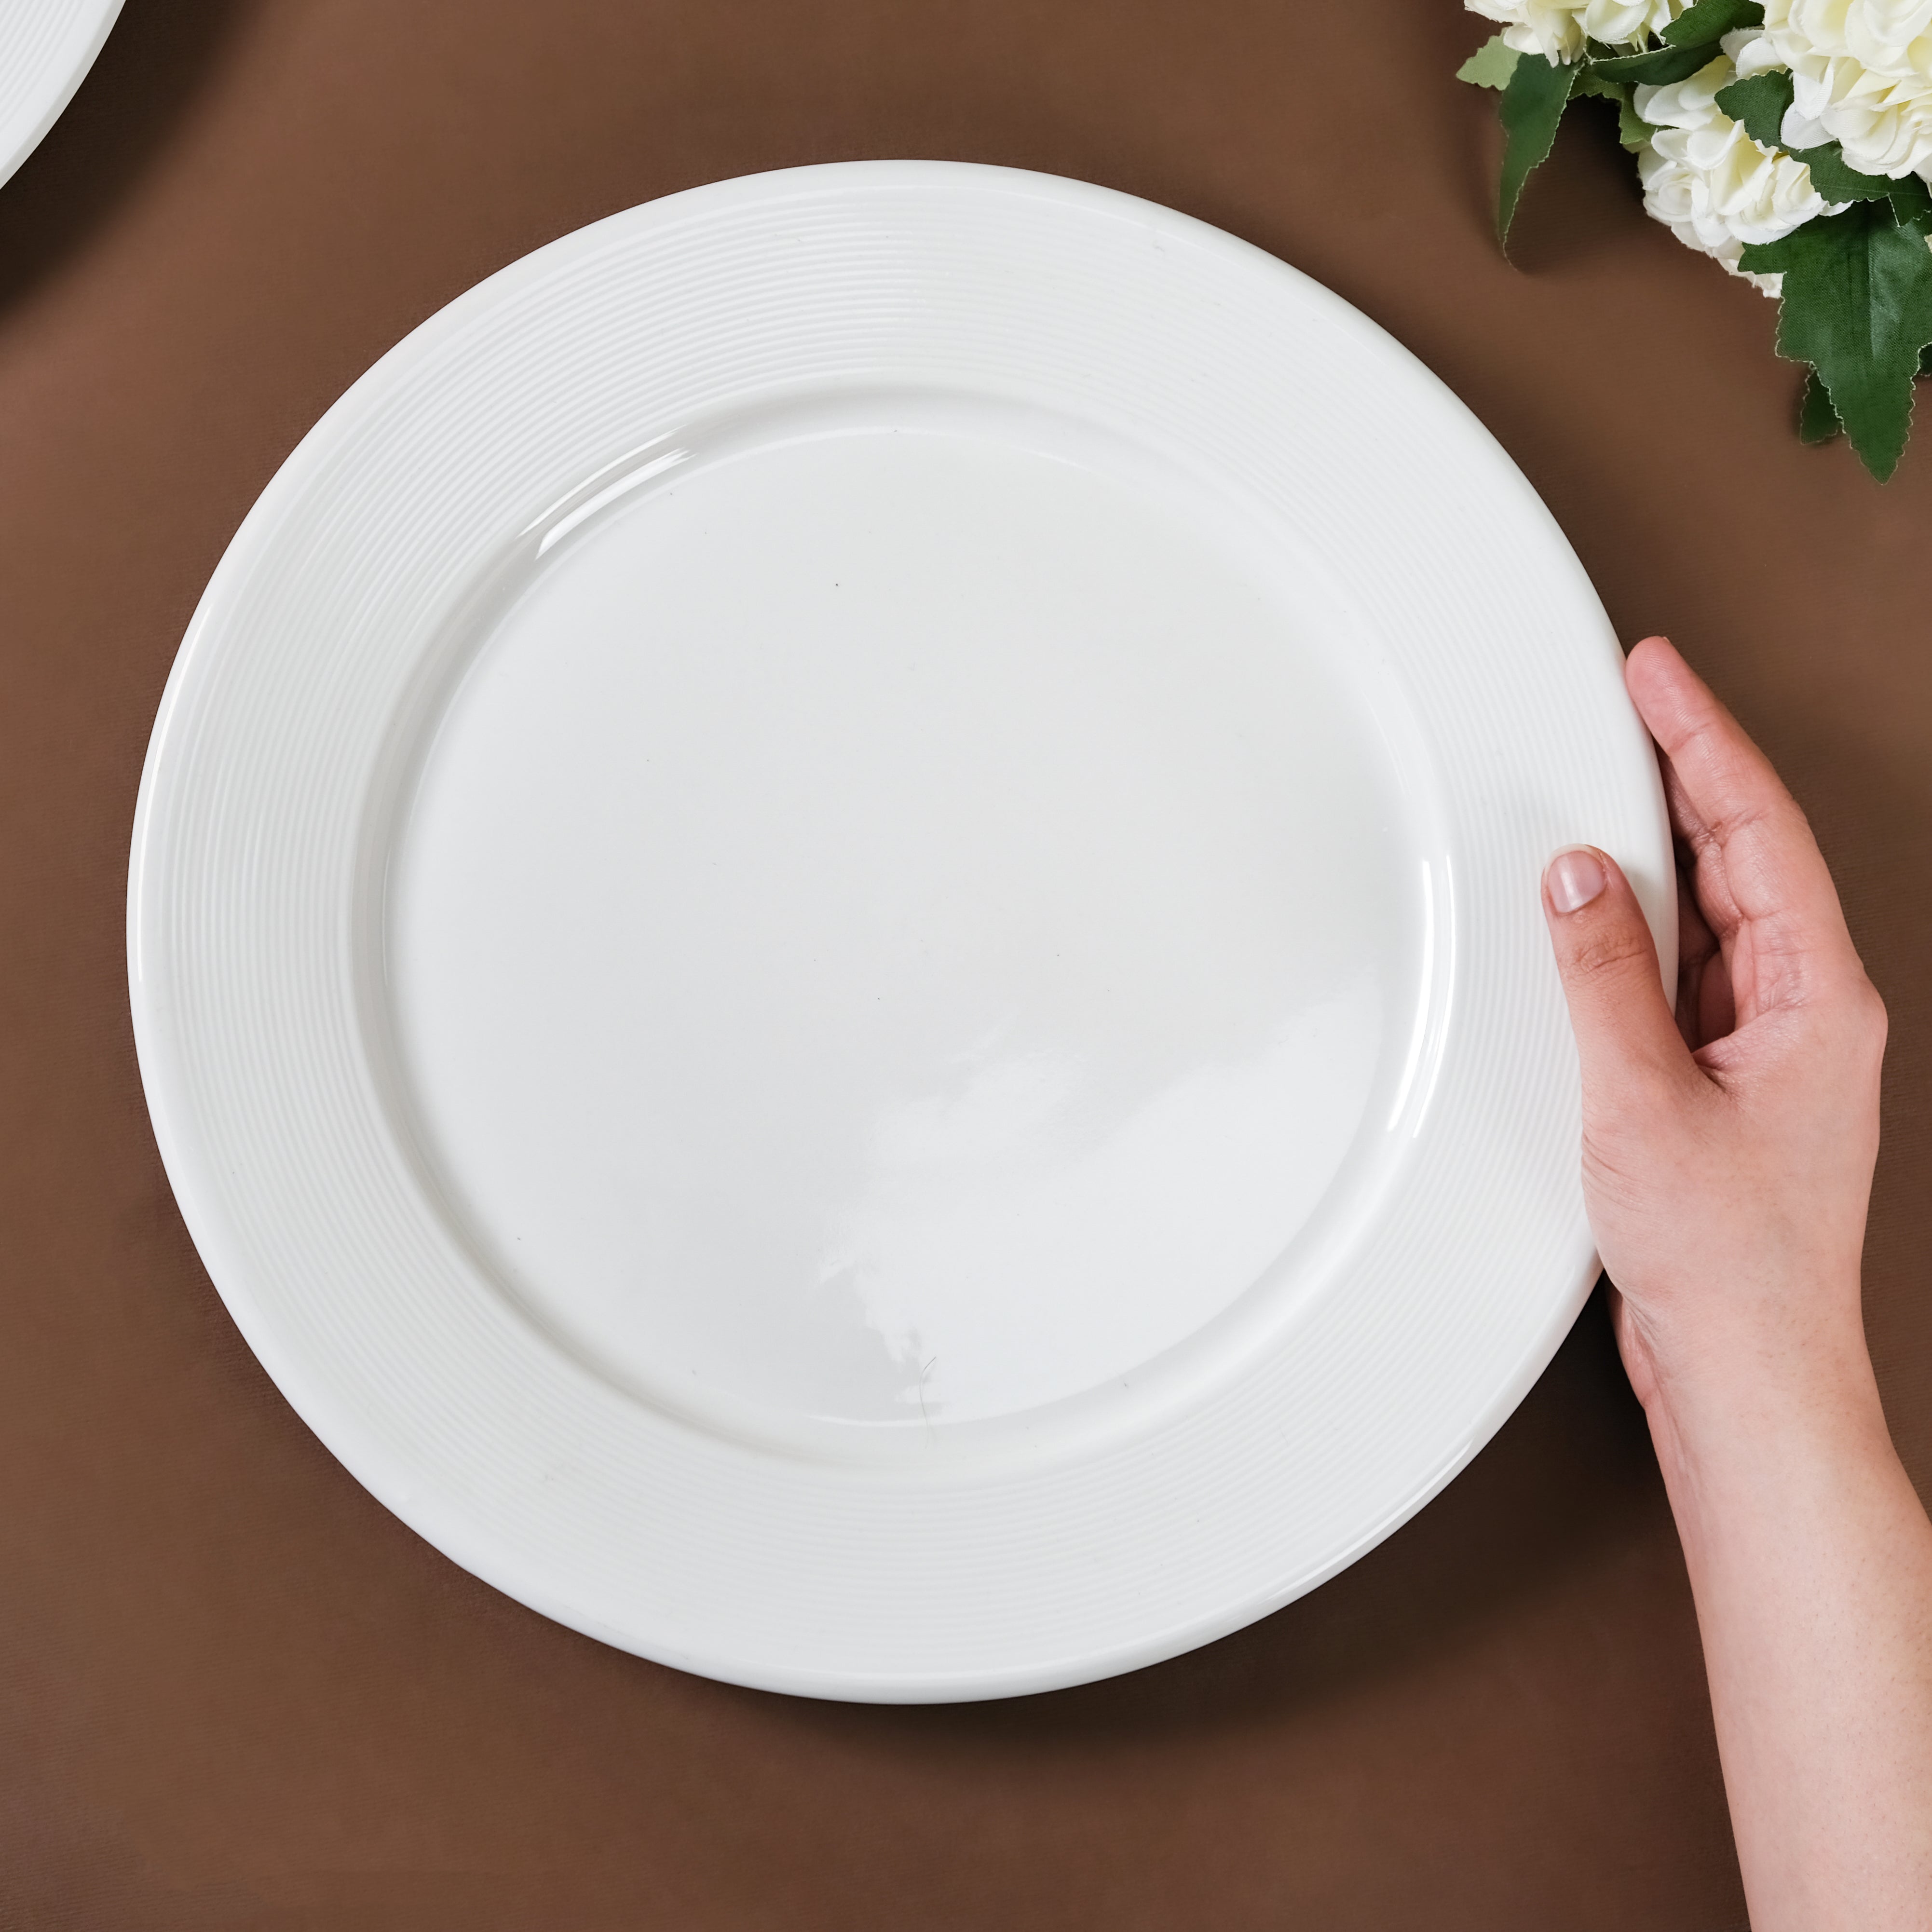 Oval Paper Plates White, 12 Inch Large Paper Plates, 100%, 56% OFF